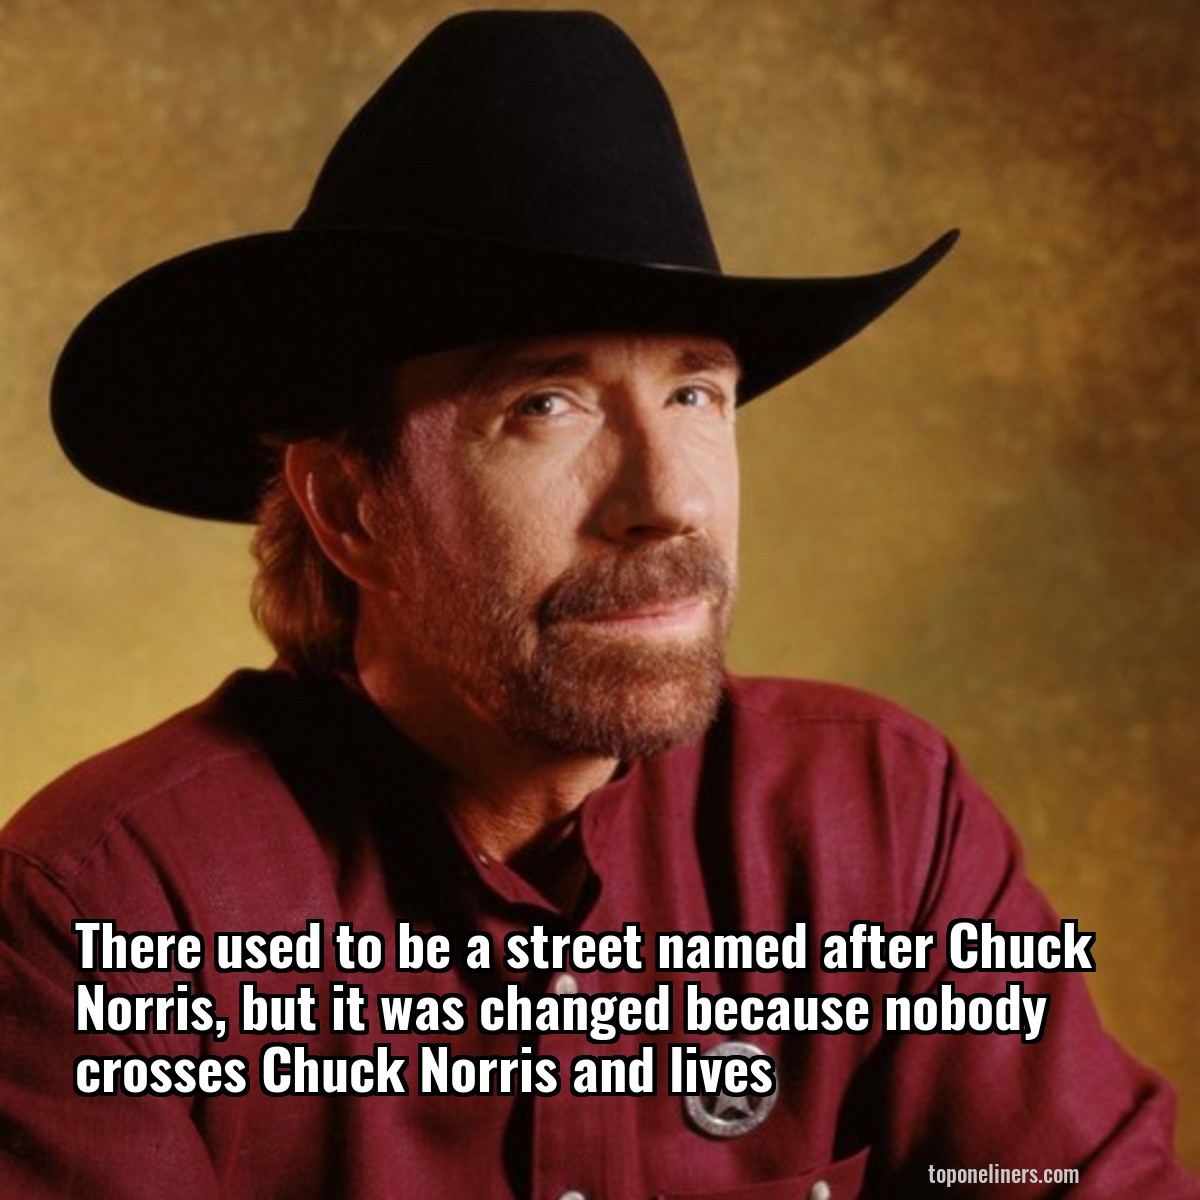 There used to be a street named after Chuck Norris, but it was changed because nobody crosses Chuck Norris and lives